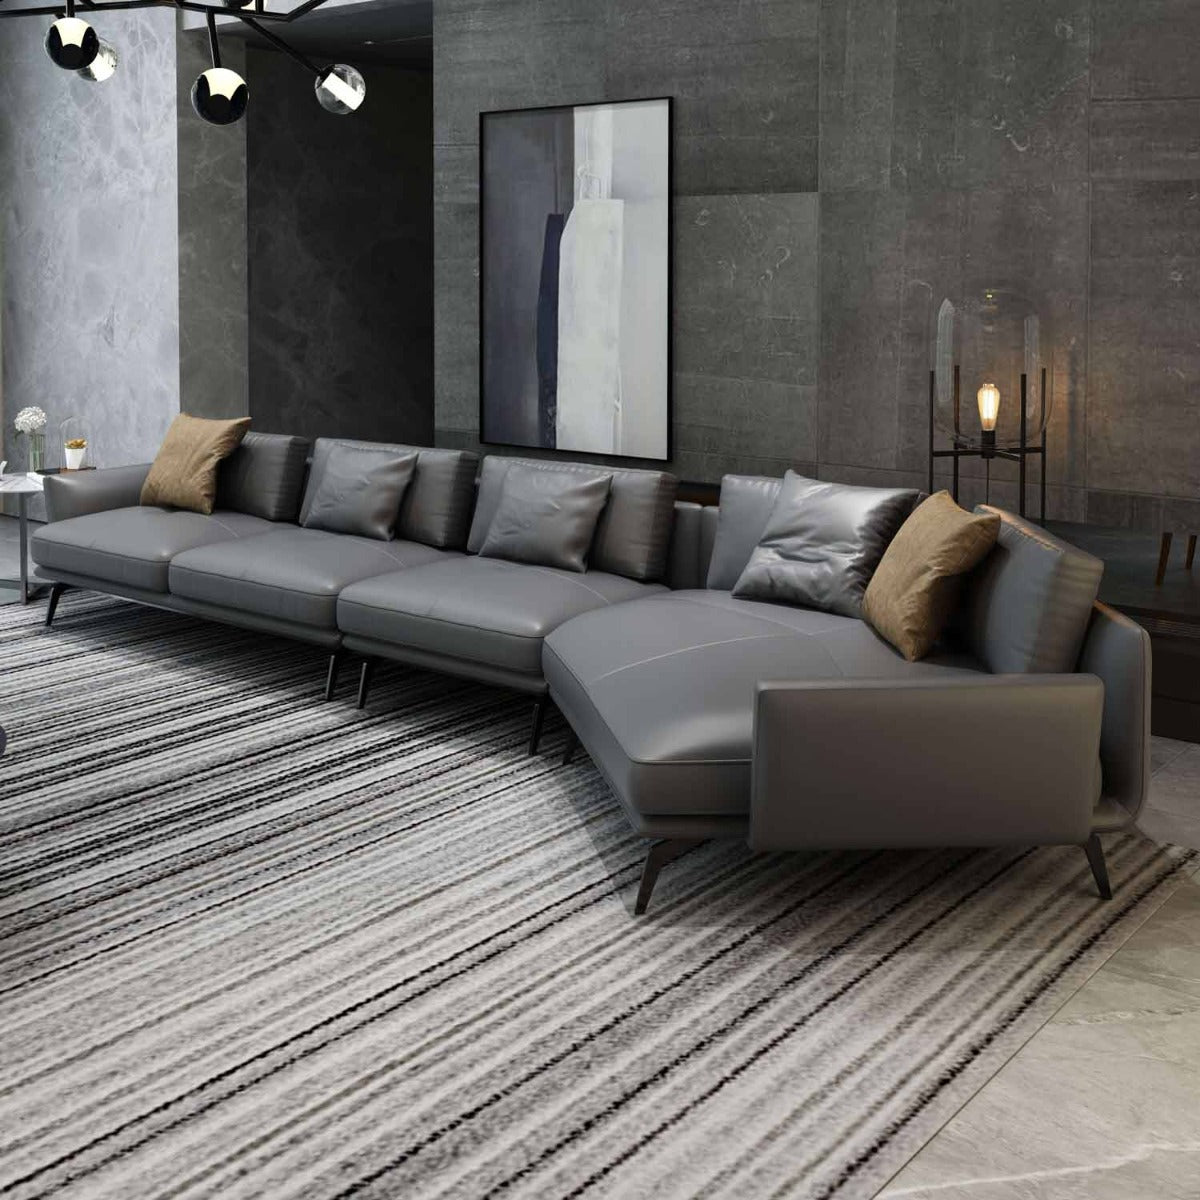 European Furniture - Galaxy Right Hand Chaise Sectional in Smokey Grey - 54434R-3RHC - New Star Living